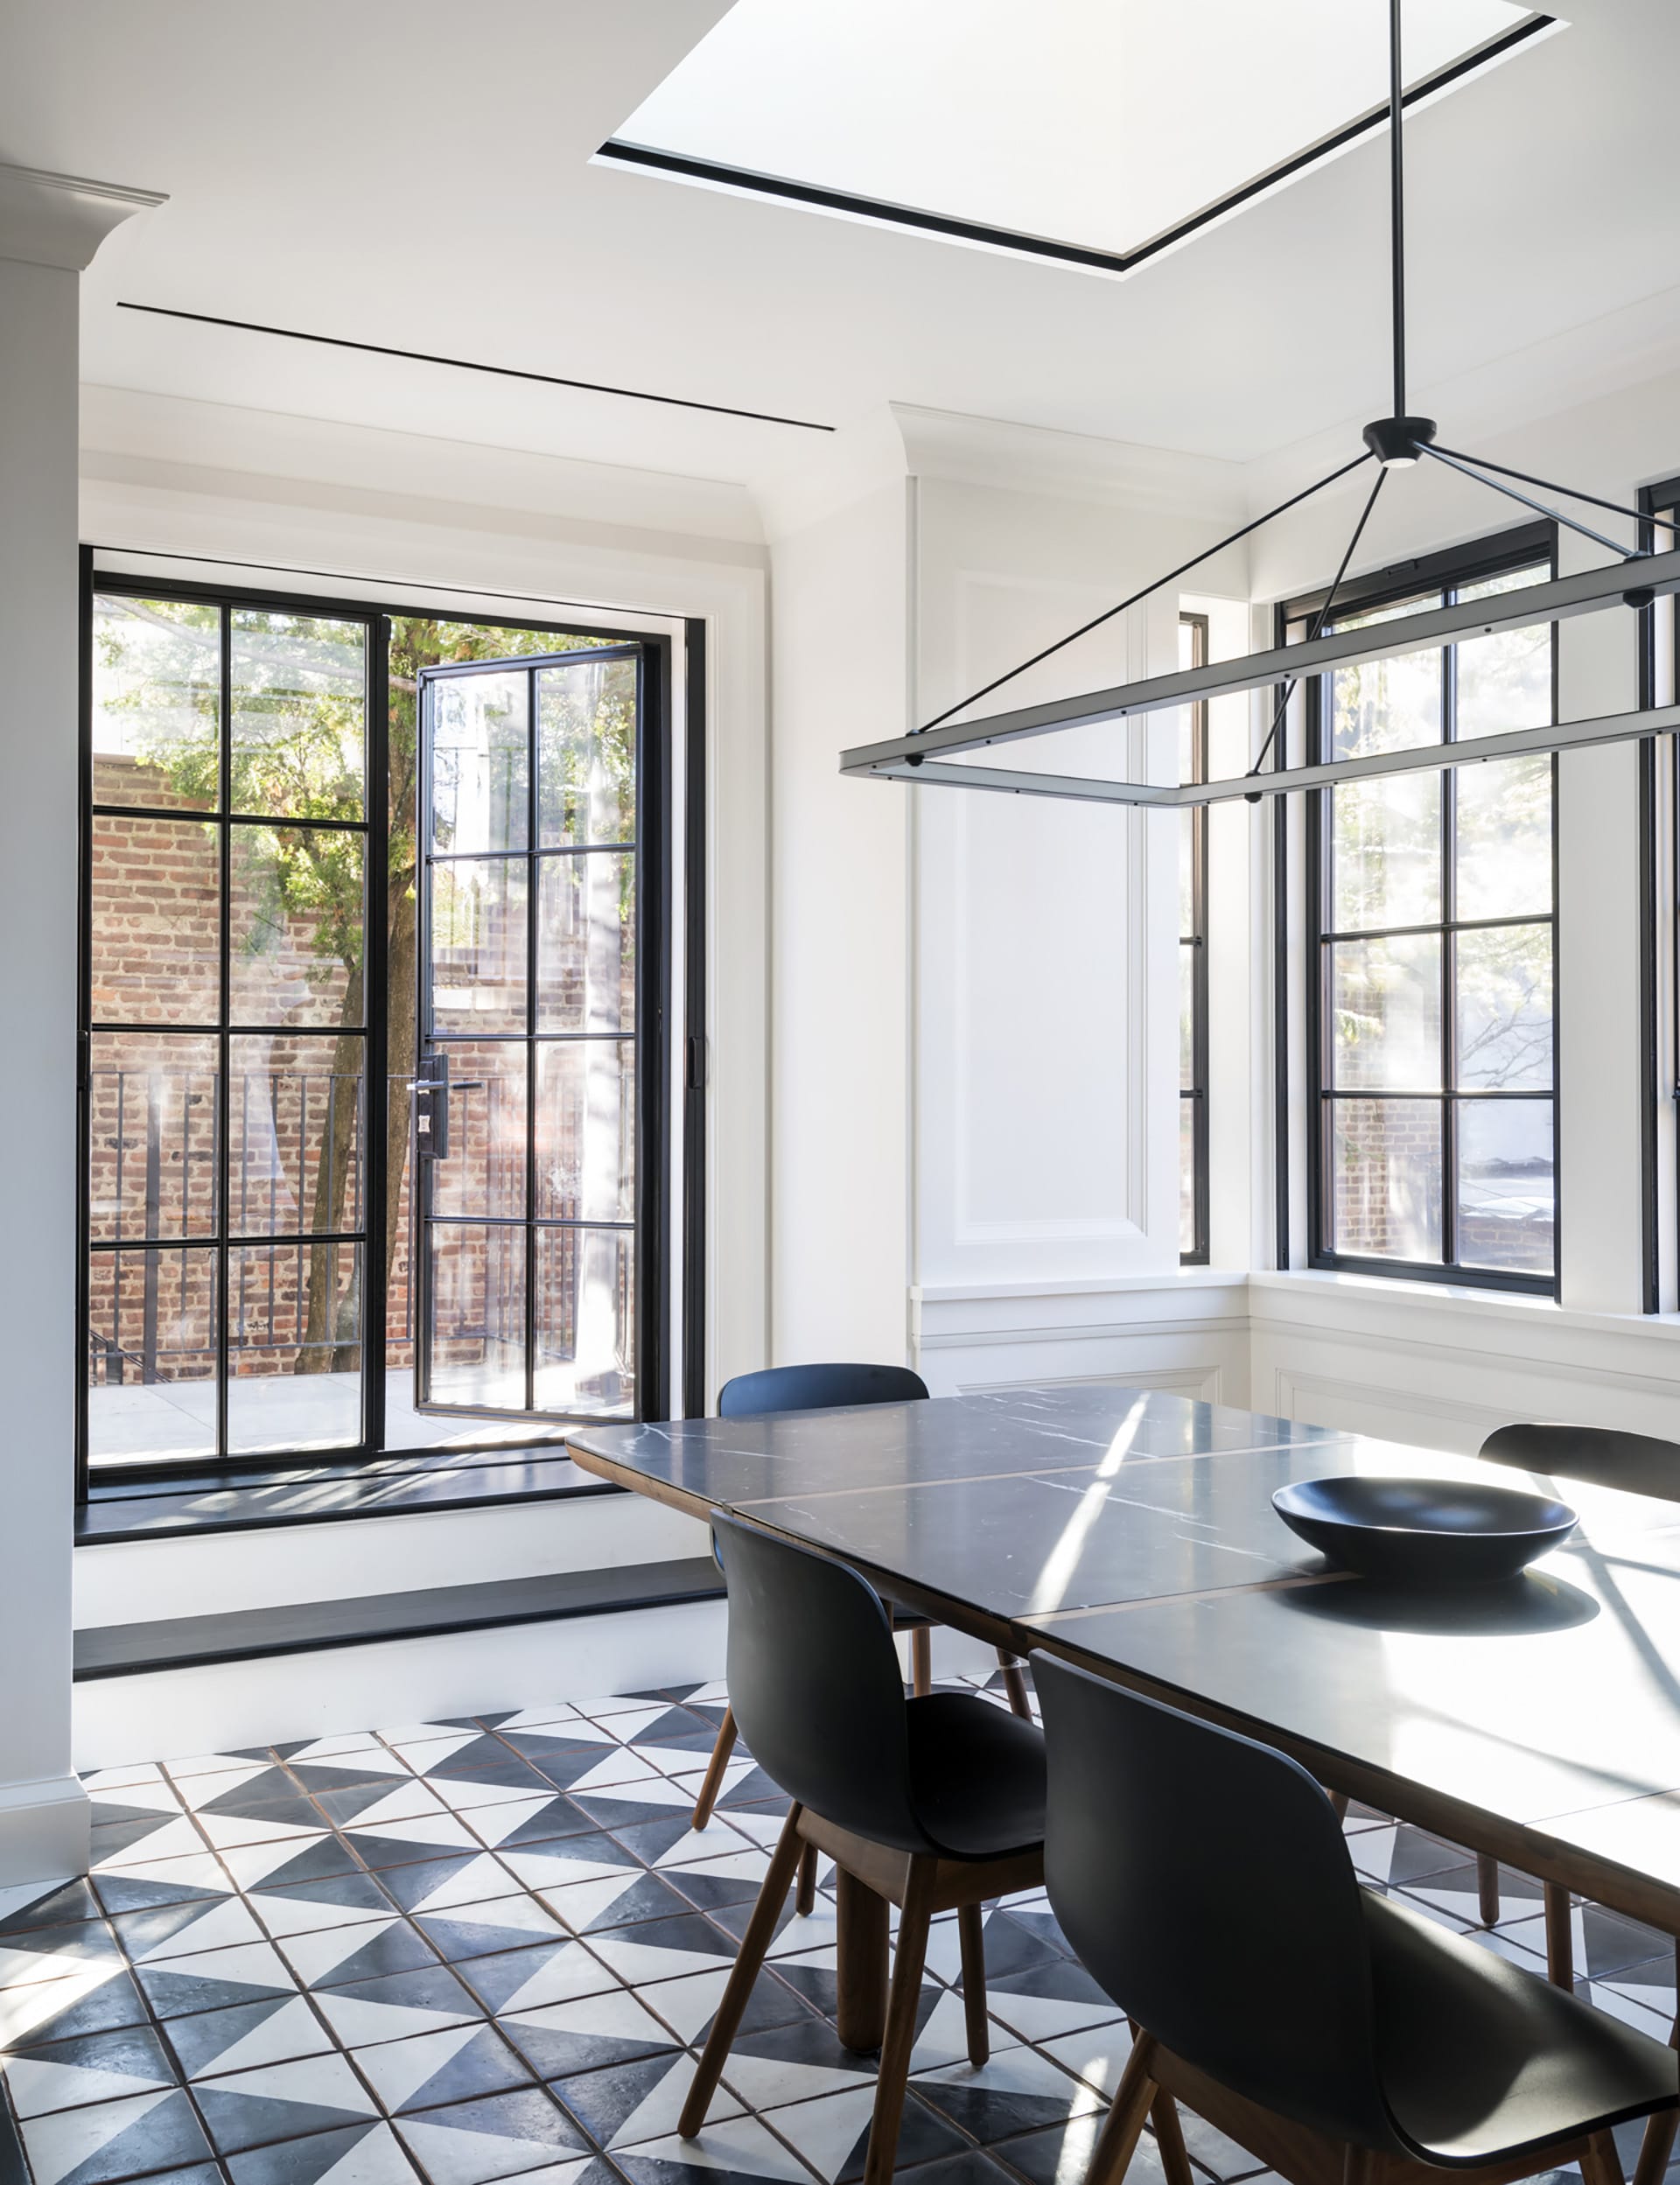 Dining area at the rear of a Brooklyn Heights townhouse with glass doors, large windows, a skylight, and checkered floors.